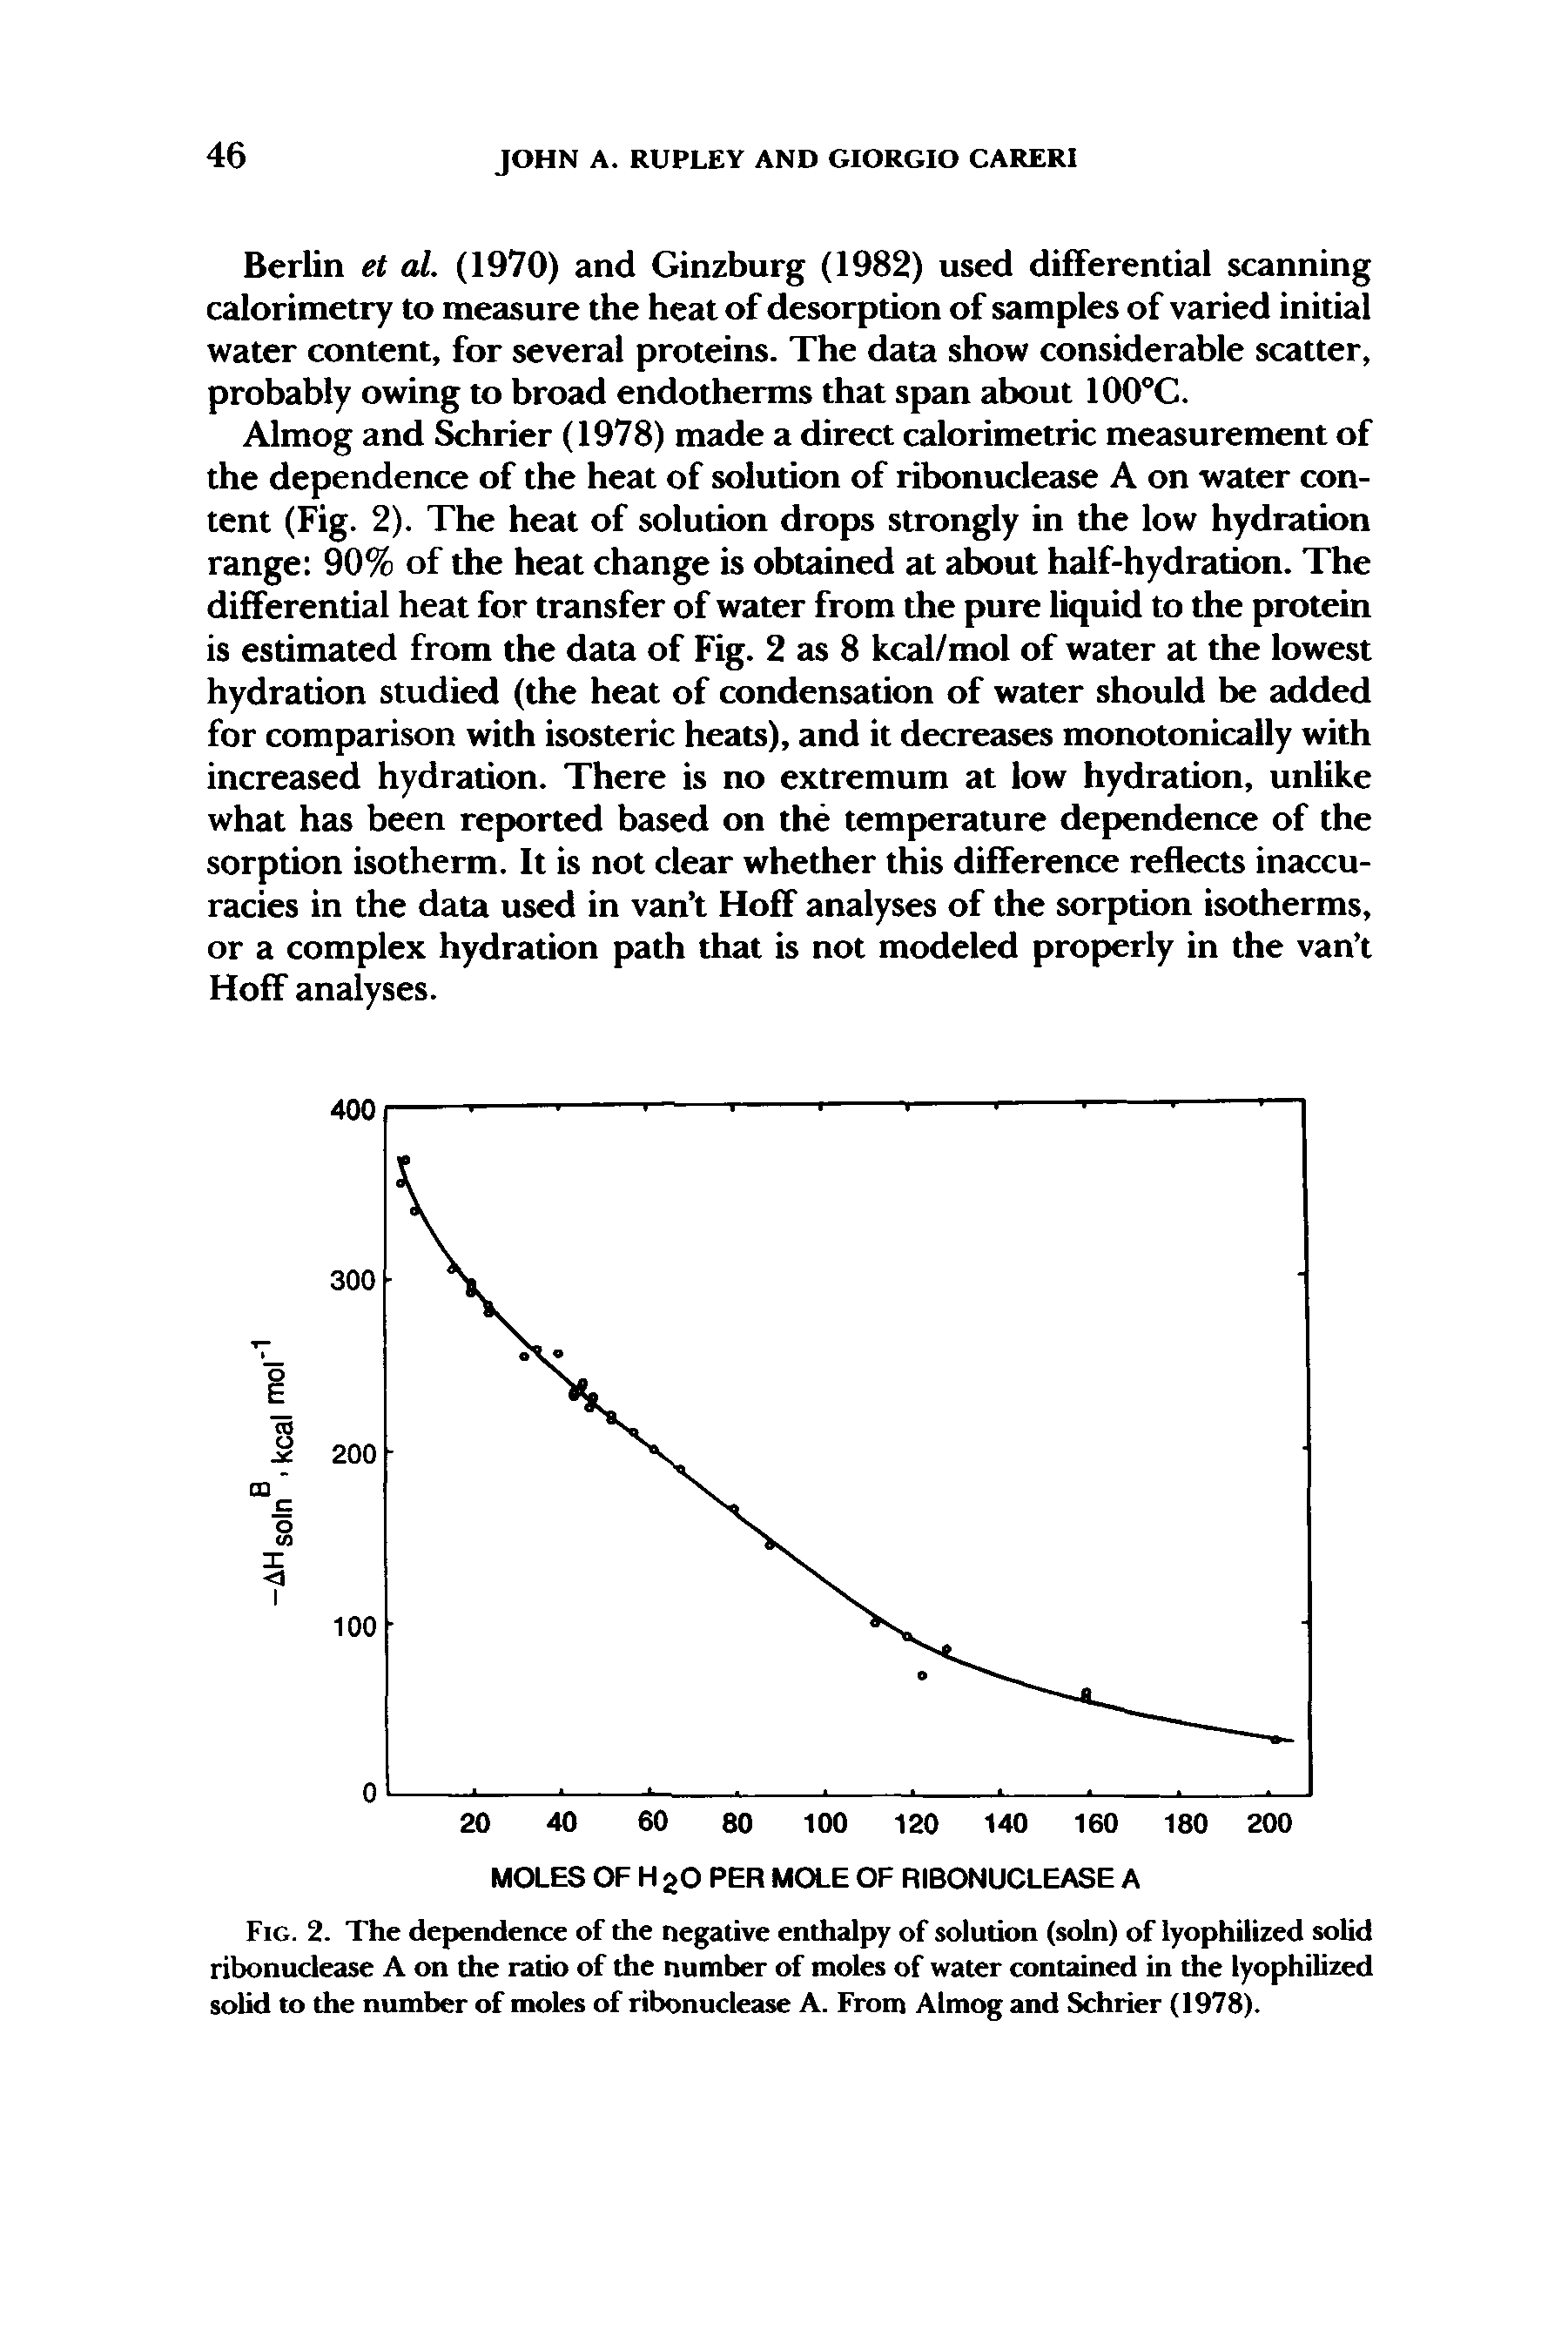 Fig. 2. The dependence of the negative enthalpy of solution (soln) of lyophilized solid ribonuclease A on the rado of the number of moles of water contained in the lyophilized solid to the number of moles of ribonuclease A. From Almog and Schrier (1978).